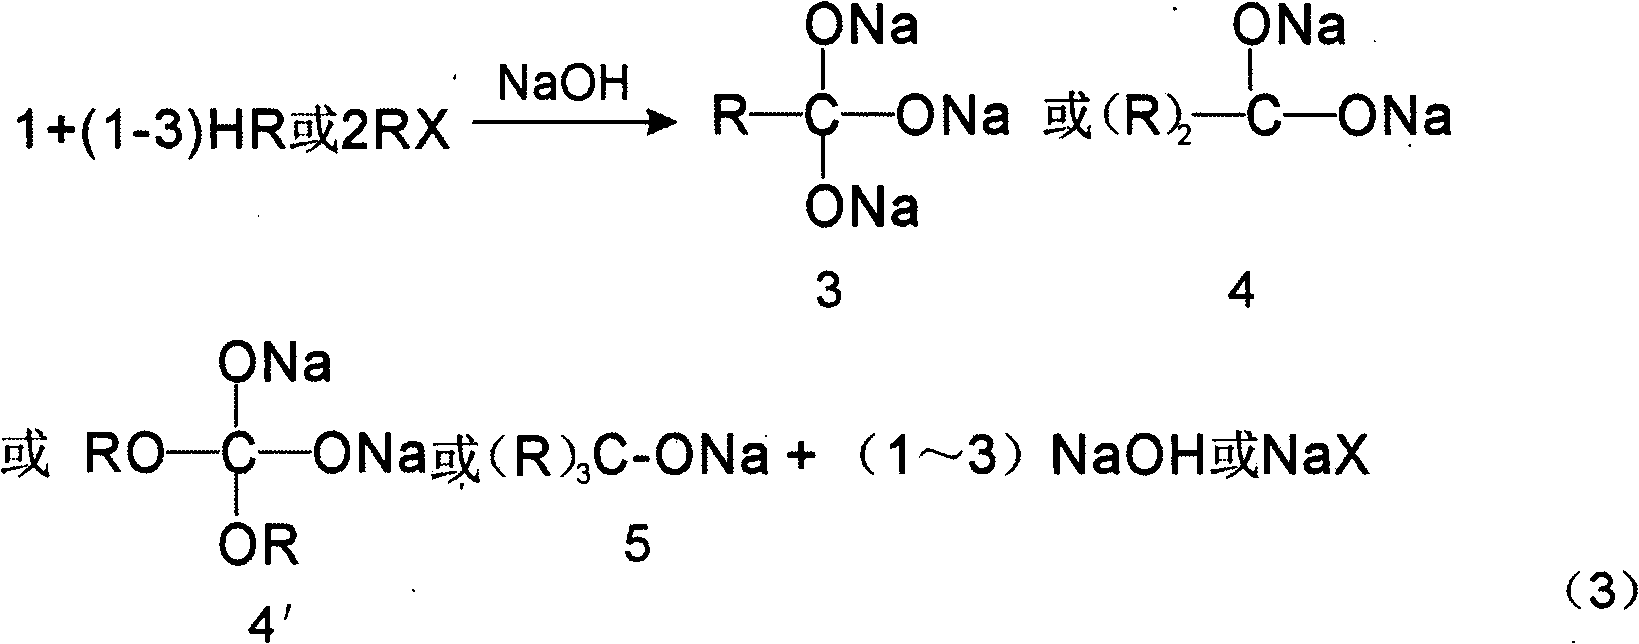 Method for preparing DMC, DPC, ortho-carbonate, ortho-formate, dimethyl ether, and the like by using Na2CO3 or sodium formate or CO2 or CO